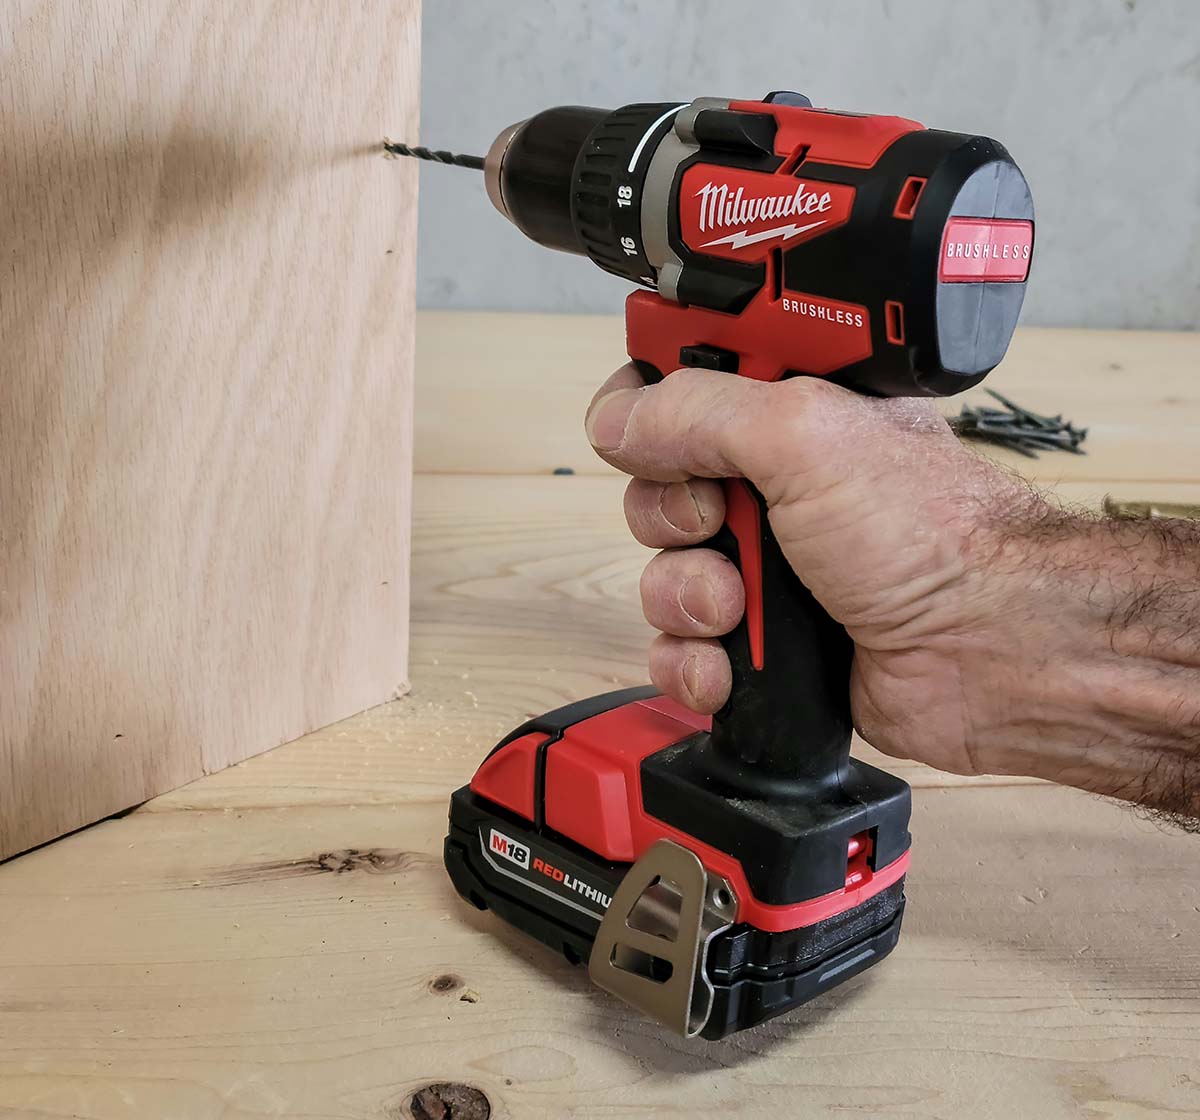 A man uses the best cordless drill to drill a pilot hole in a piece of wood